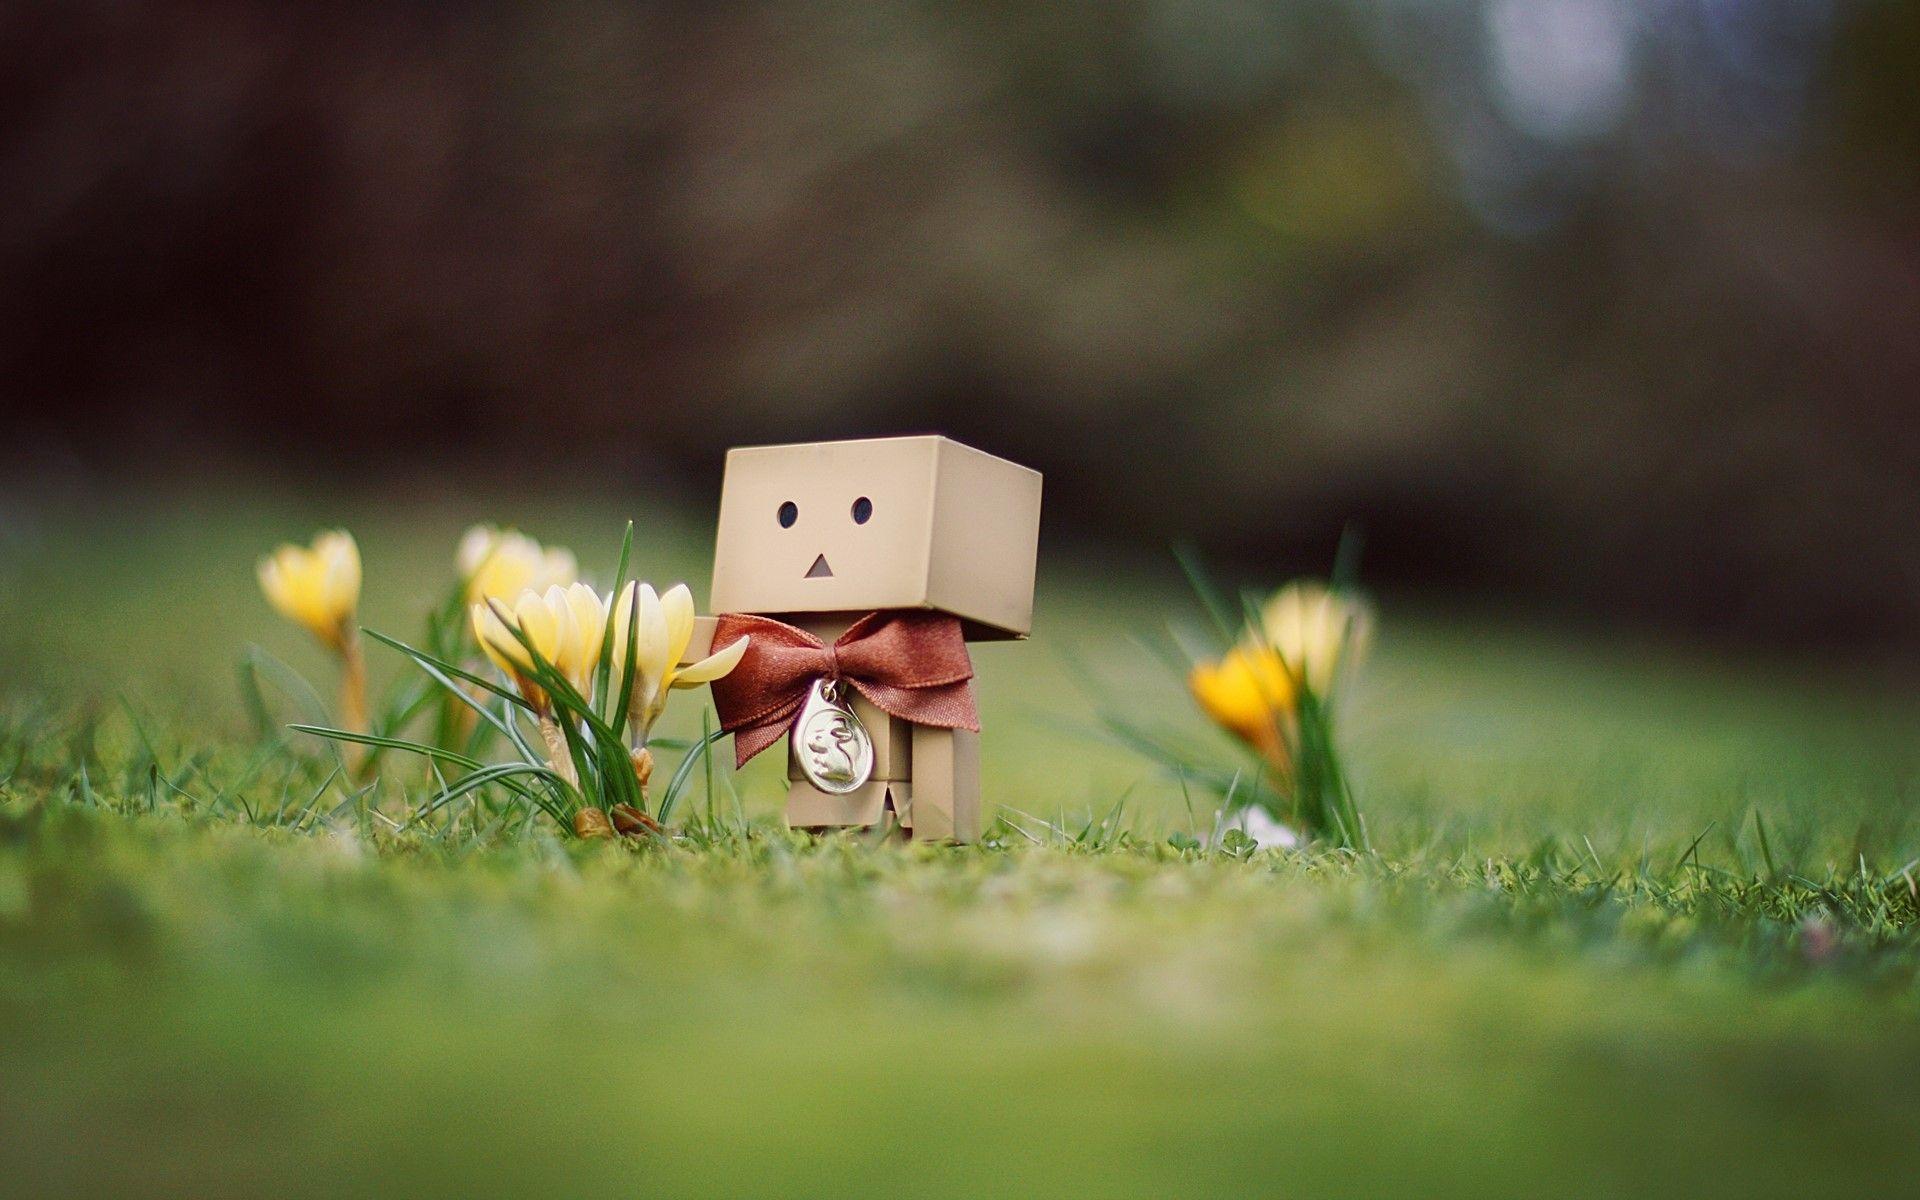 Danboard, Cardboard robot, Flowers, Grass, Bow wallpaper and background